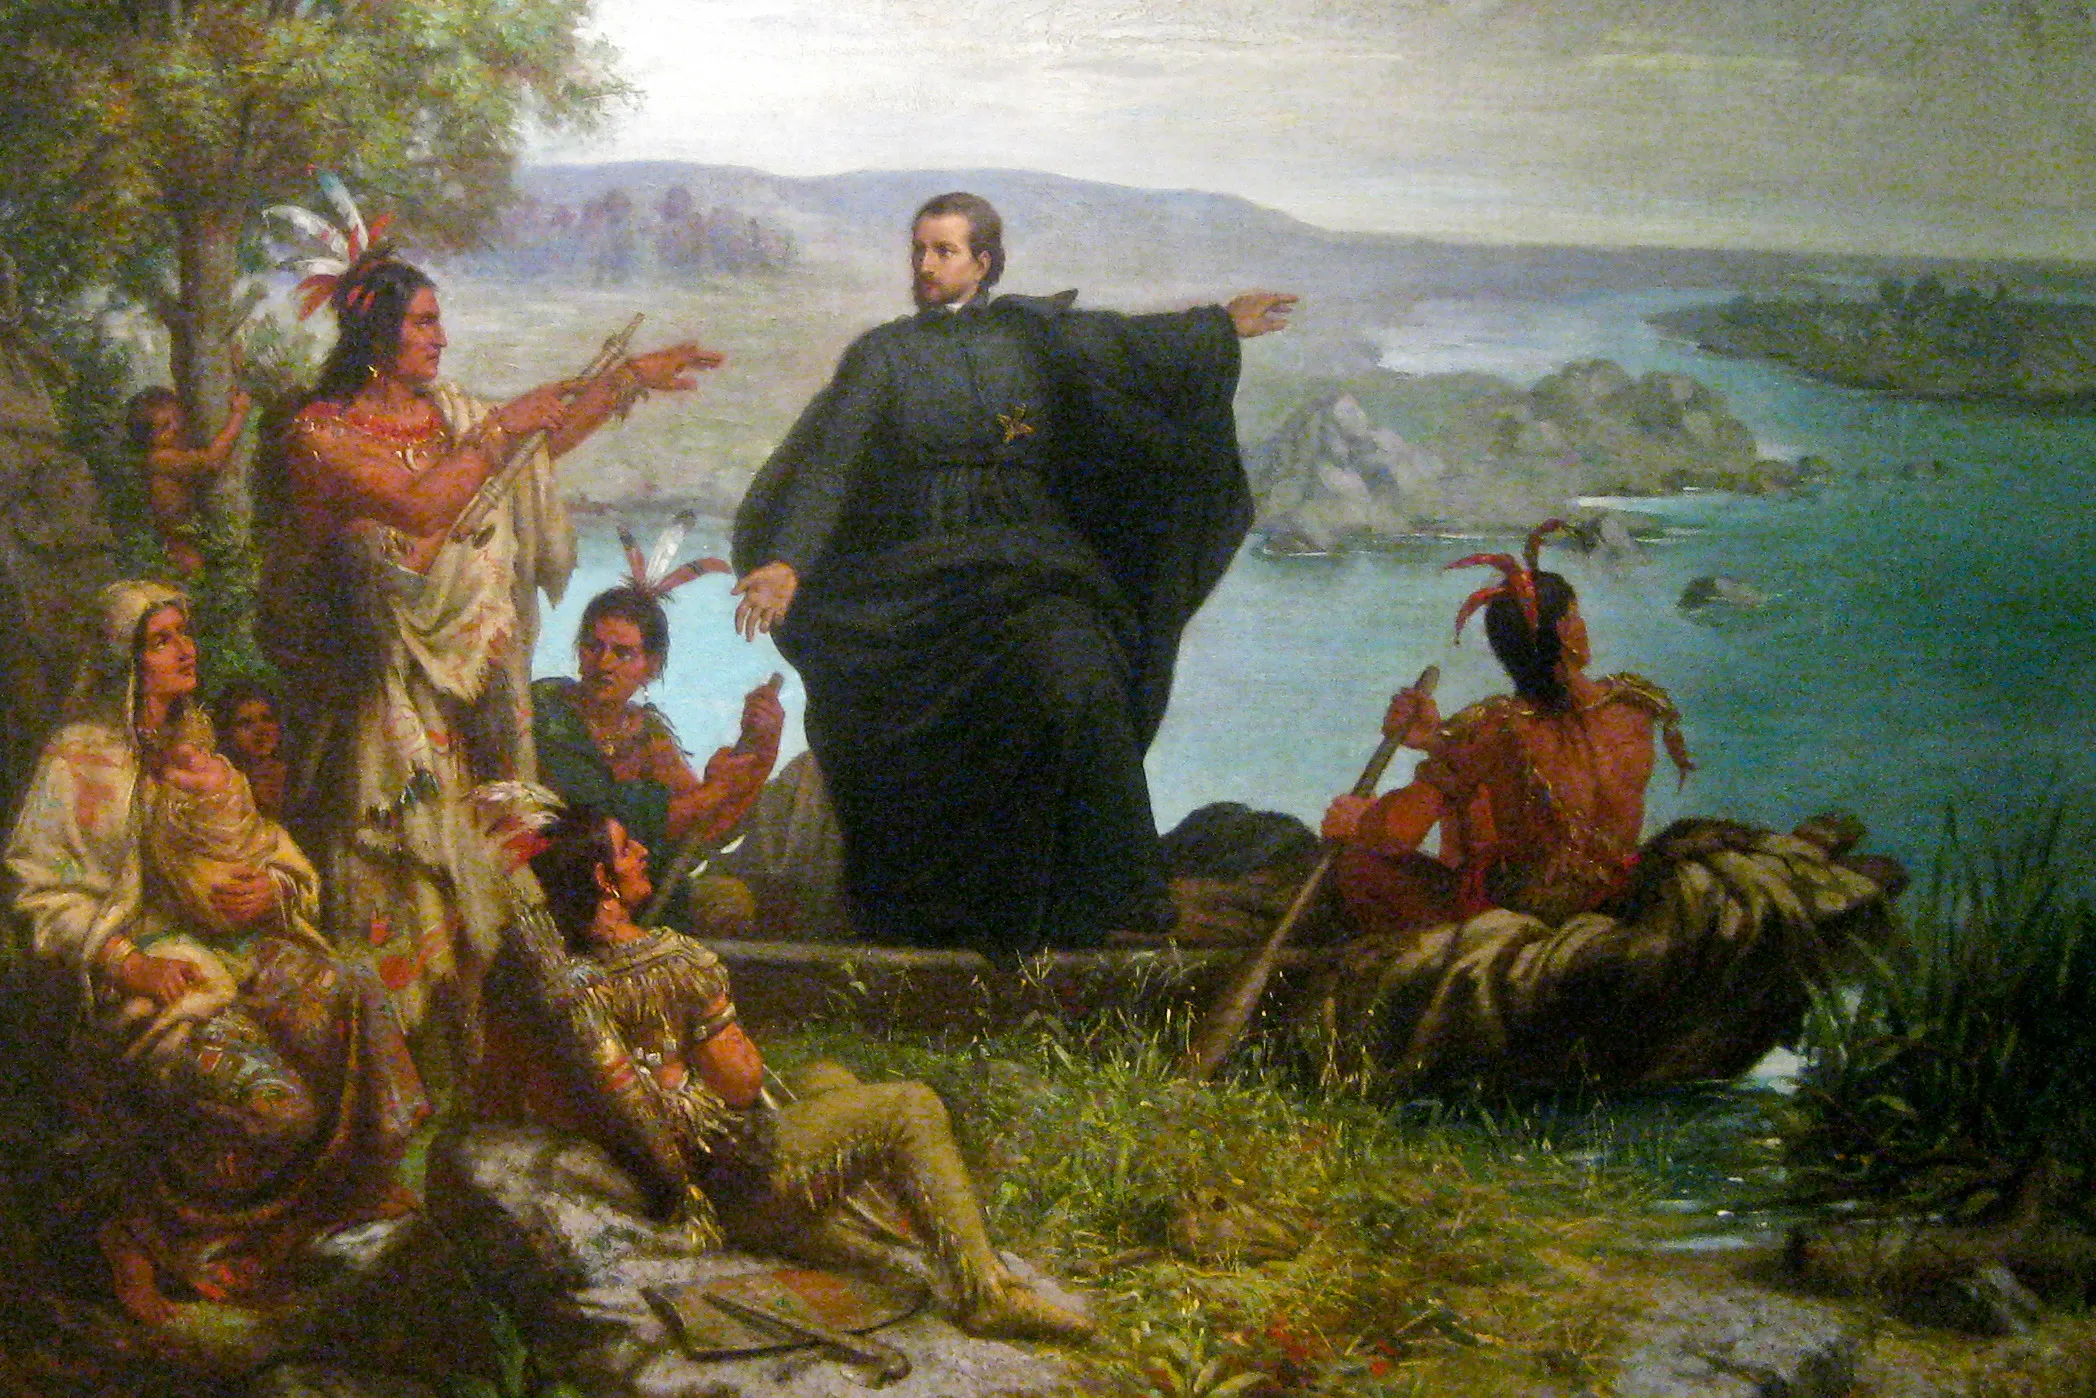 Father Jacques Marquette among the Native Americans. Wilhelm Lamprecht, 1869